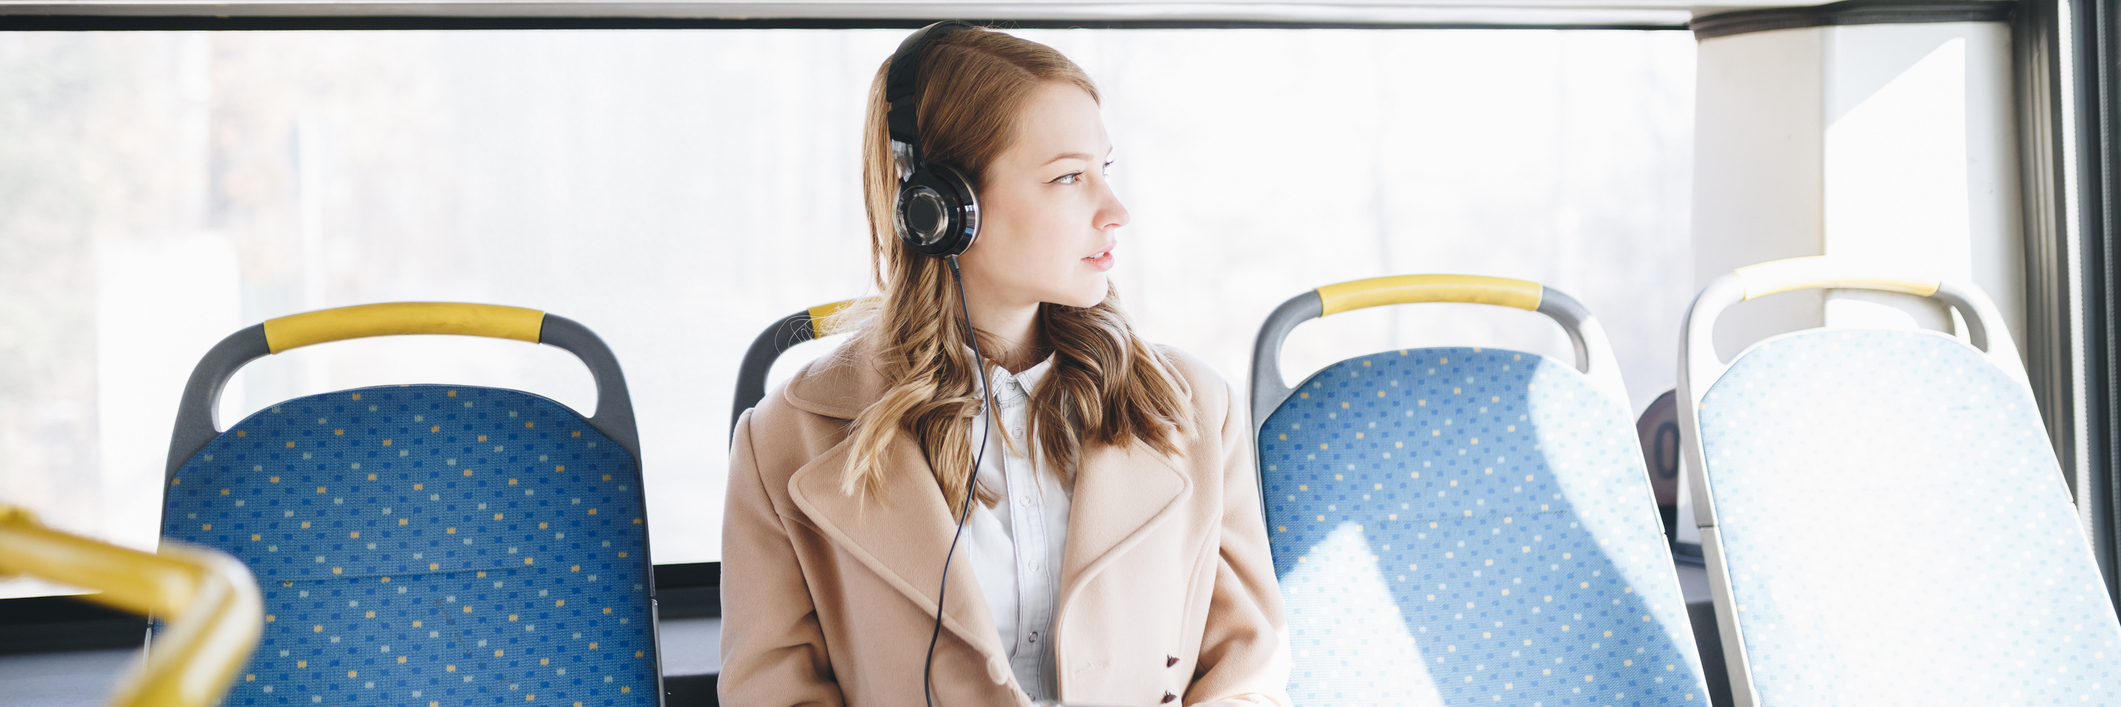 woman sitting on a bus and listening to music